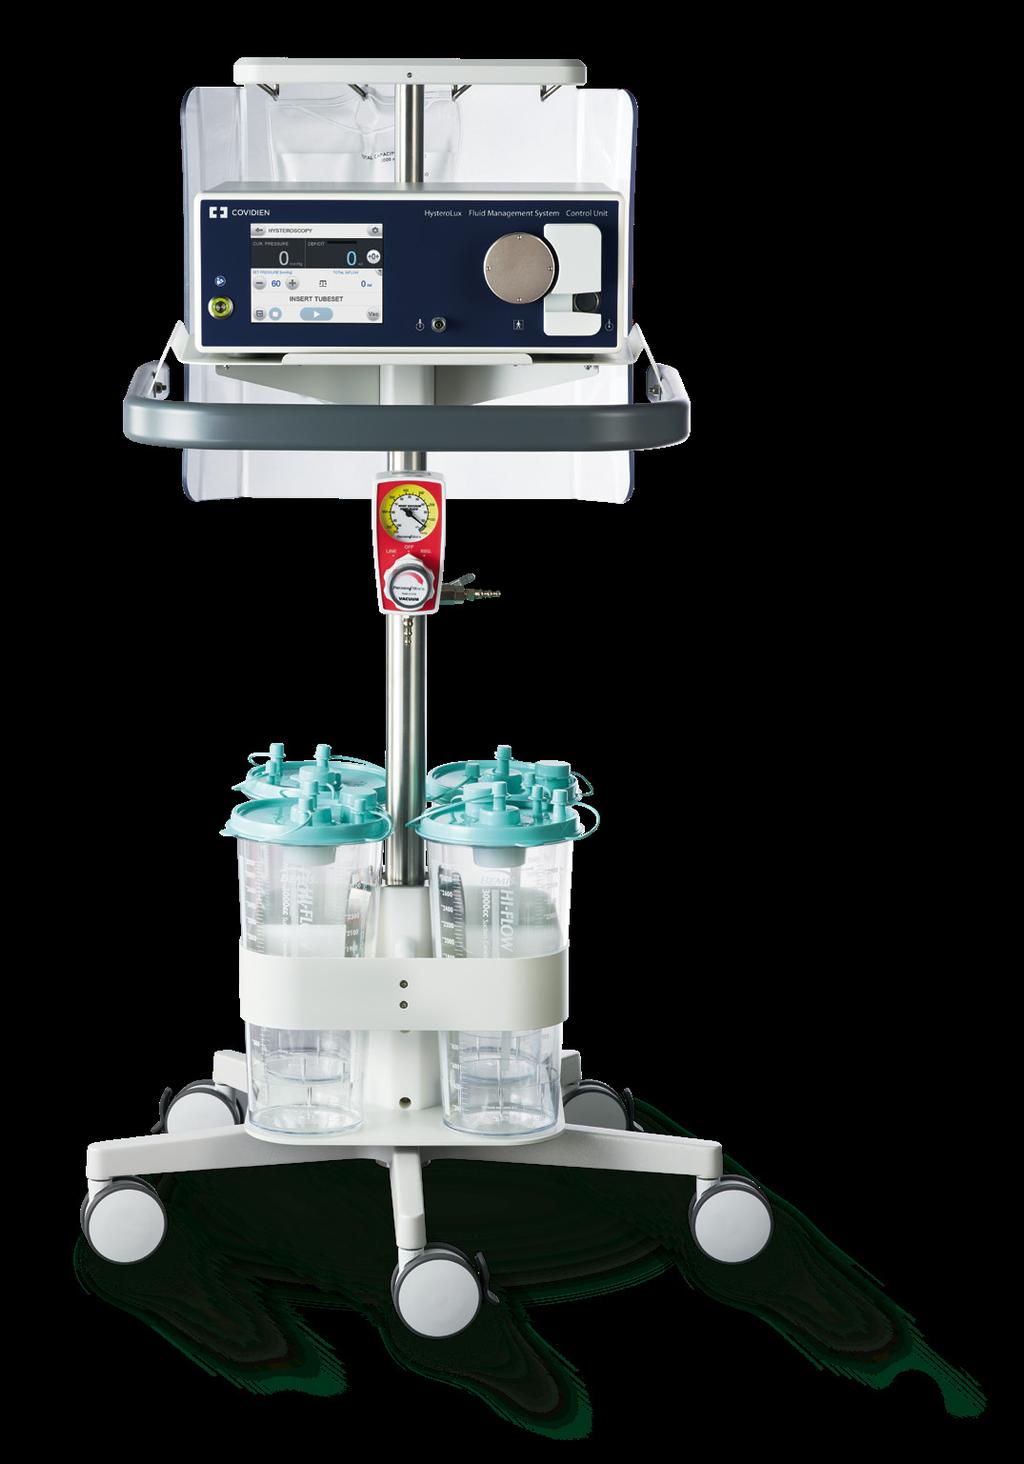 ONE COMPLETE SYSTEM FOR DIAGNOSIS AND TREATMENT OF INTRAUTERINE ABNORMALITIES The TruClear system is a complete technology platform for hysteroscopy procedures.